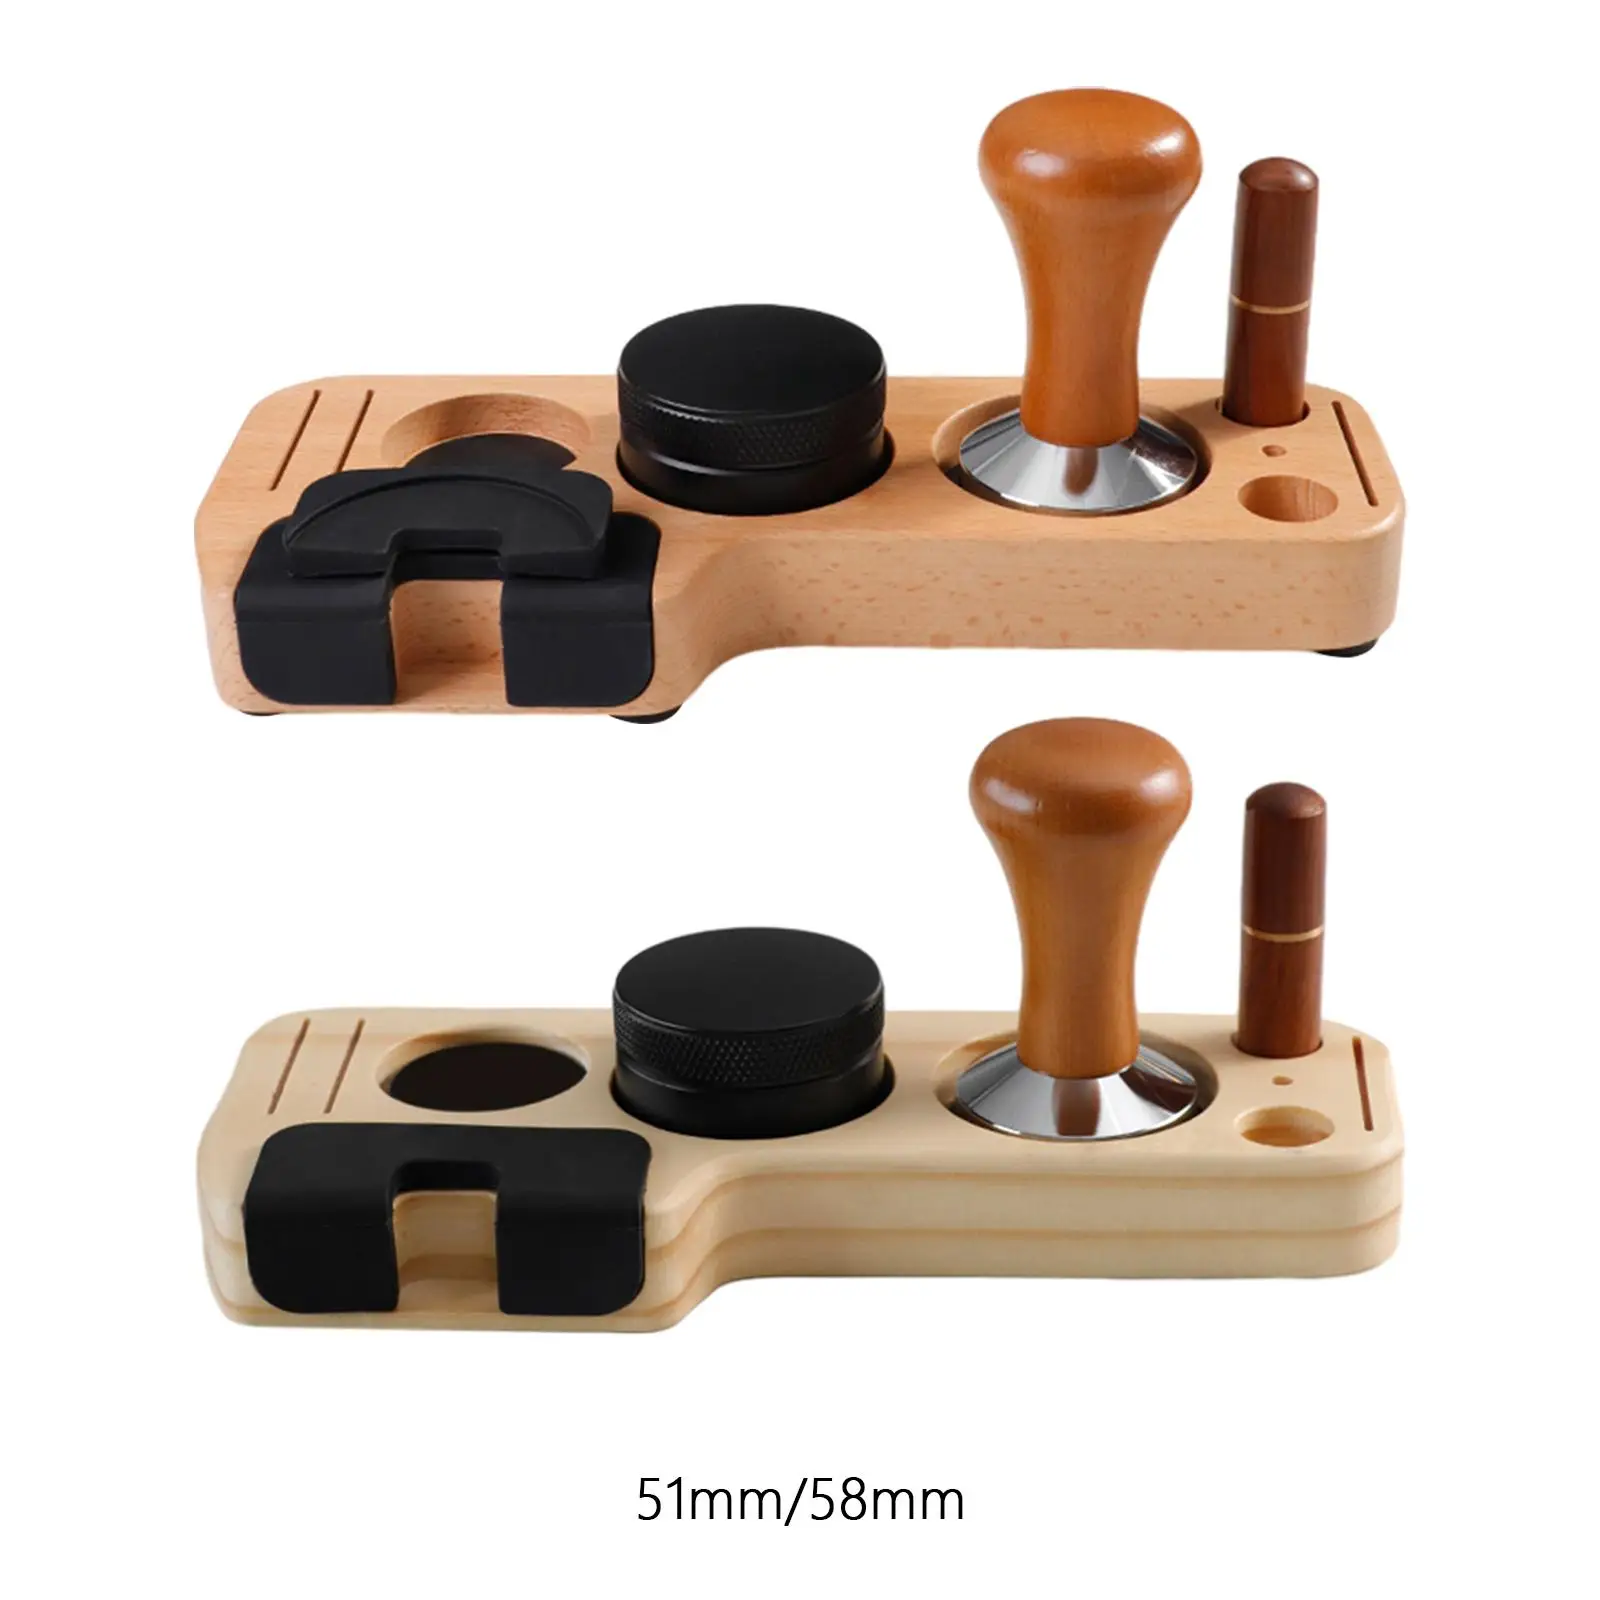 Espresso Tamping Stand Set Barista Part Multipurpose Espresso Accessories Kits for Counters Tearoom Worktop Cafes Coffee Bar